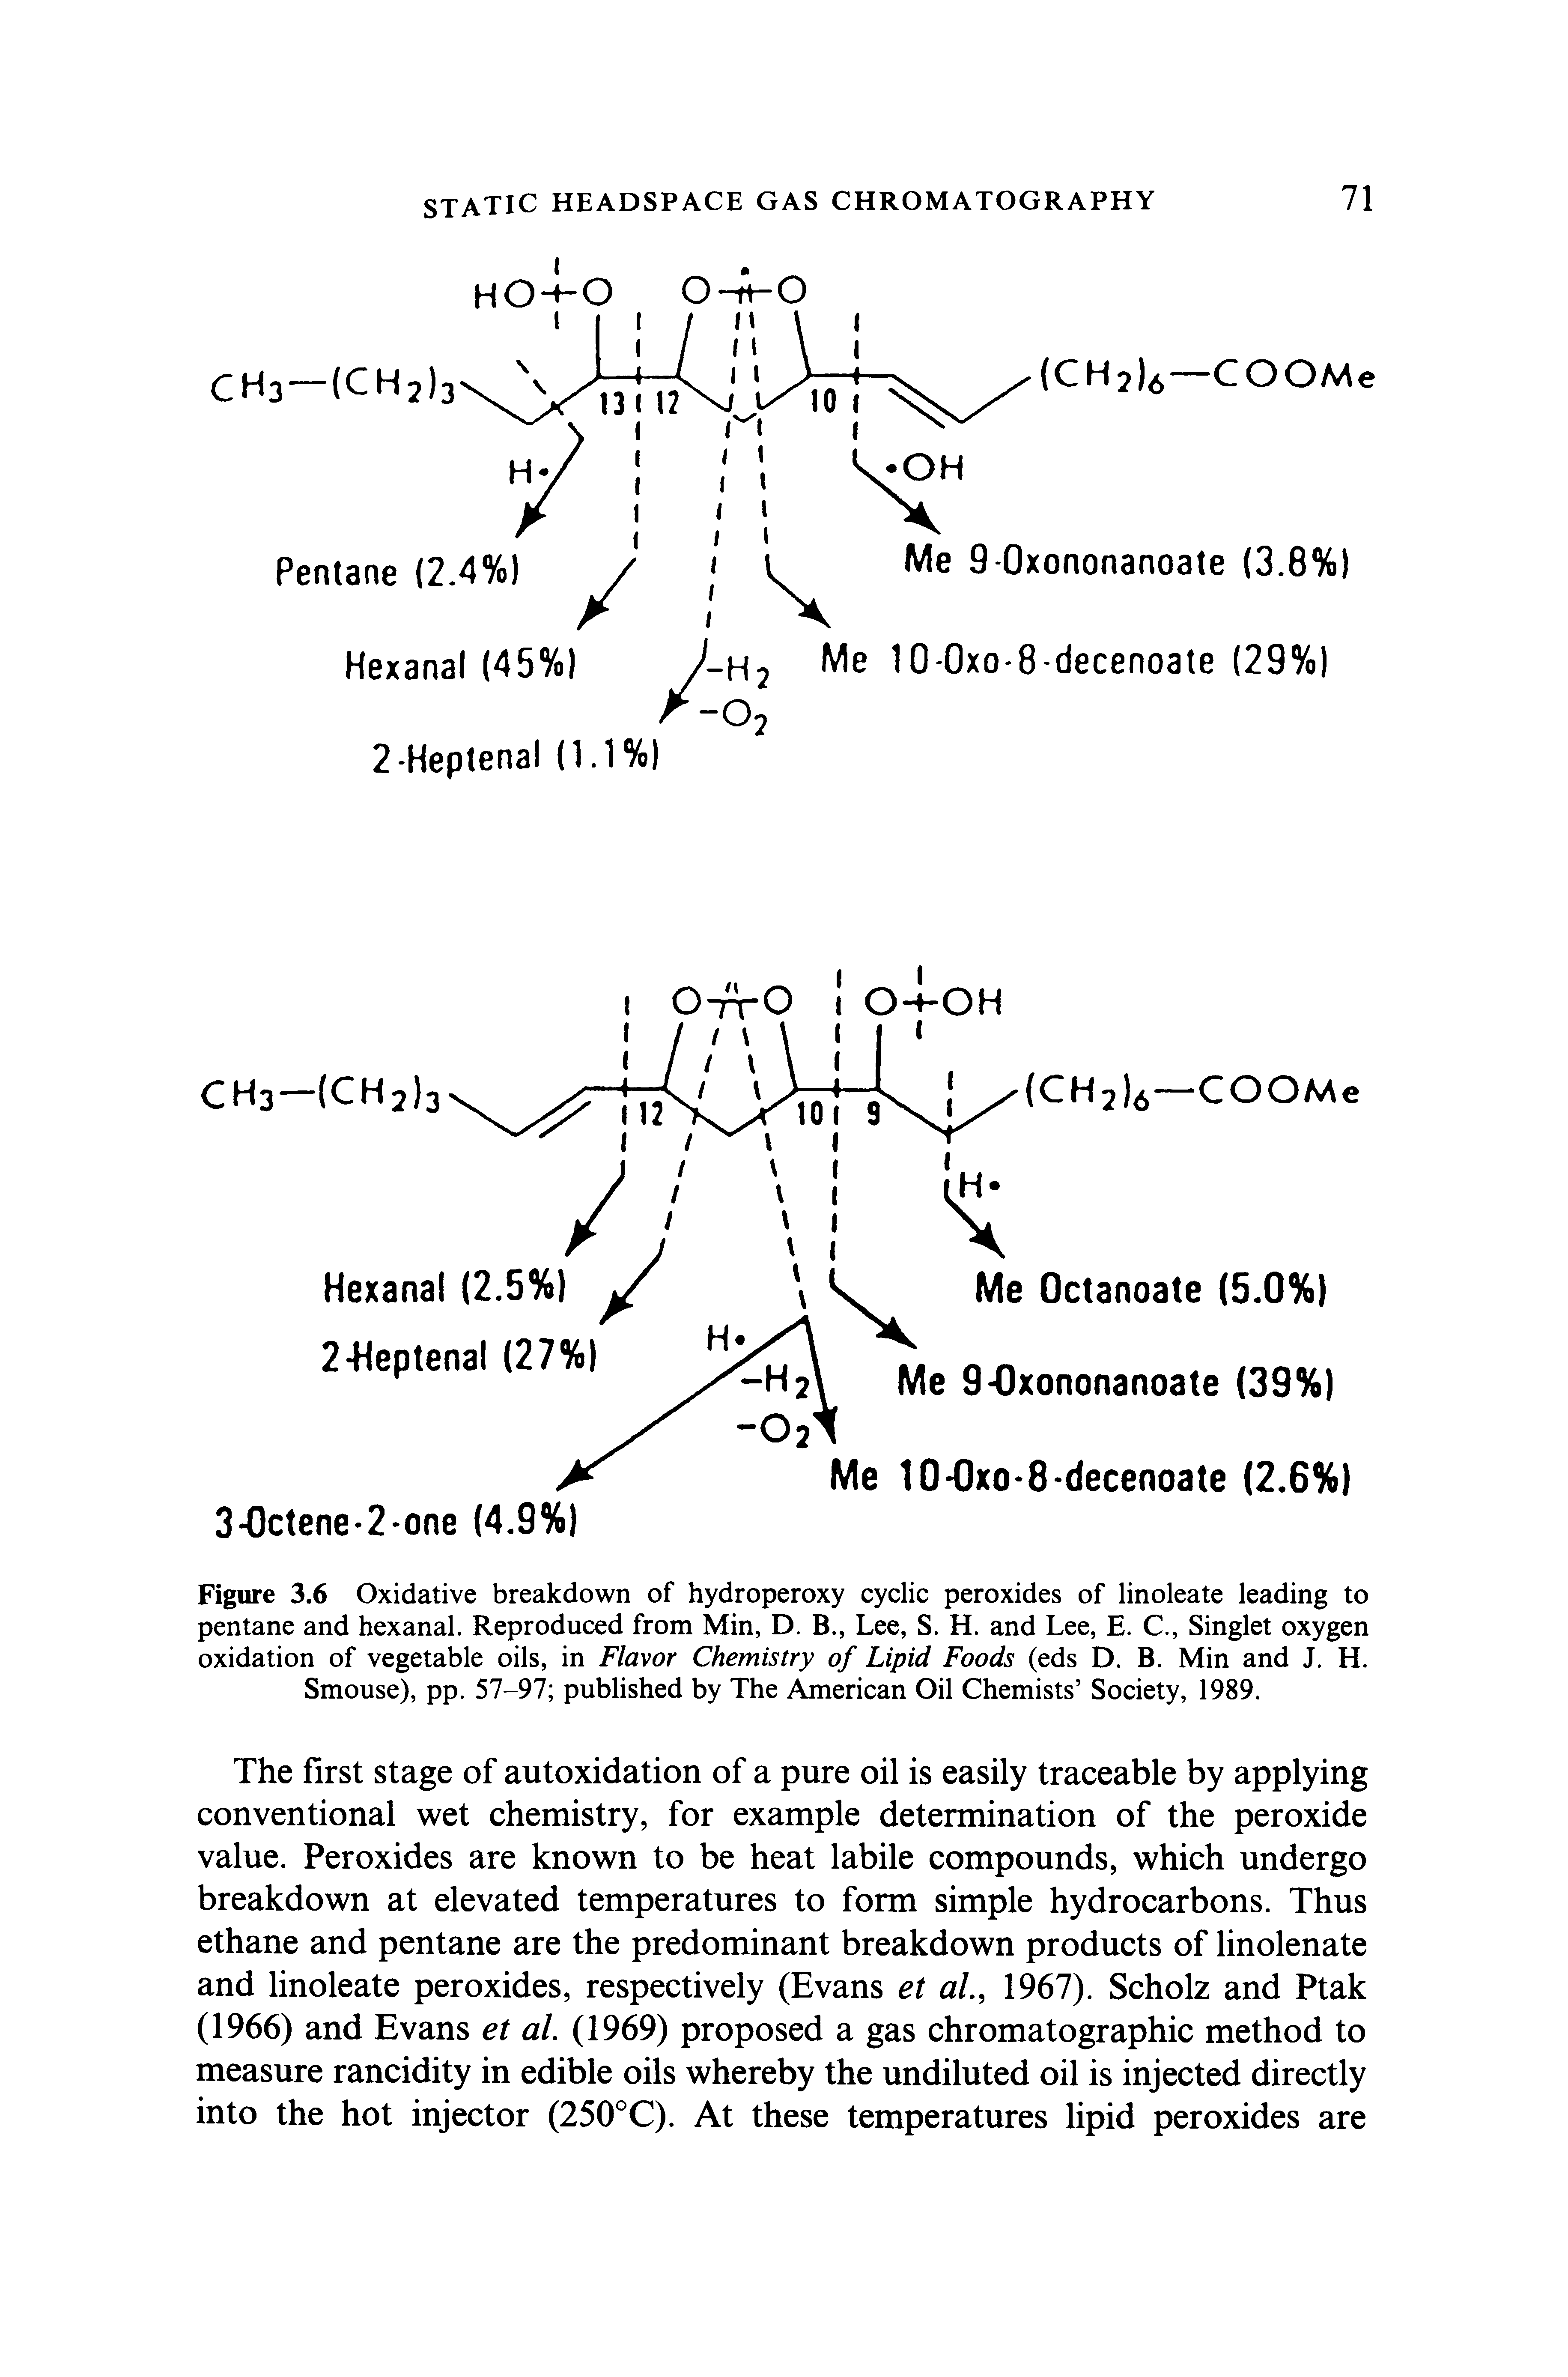 Figure 3.6 Oxidative breakdown of hydroperoxy cyclic peroxides of linoleate leading to pentane and hexanal. Reproduced from Min, D. B., Lee, S. H. and Lee, E. C., Singlet oxygen oxidation of vegetable oils, in Flavor Chemistry of Lipid Foods (eds D. B. Min and J. H.